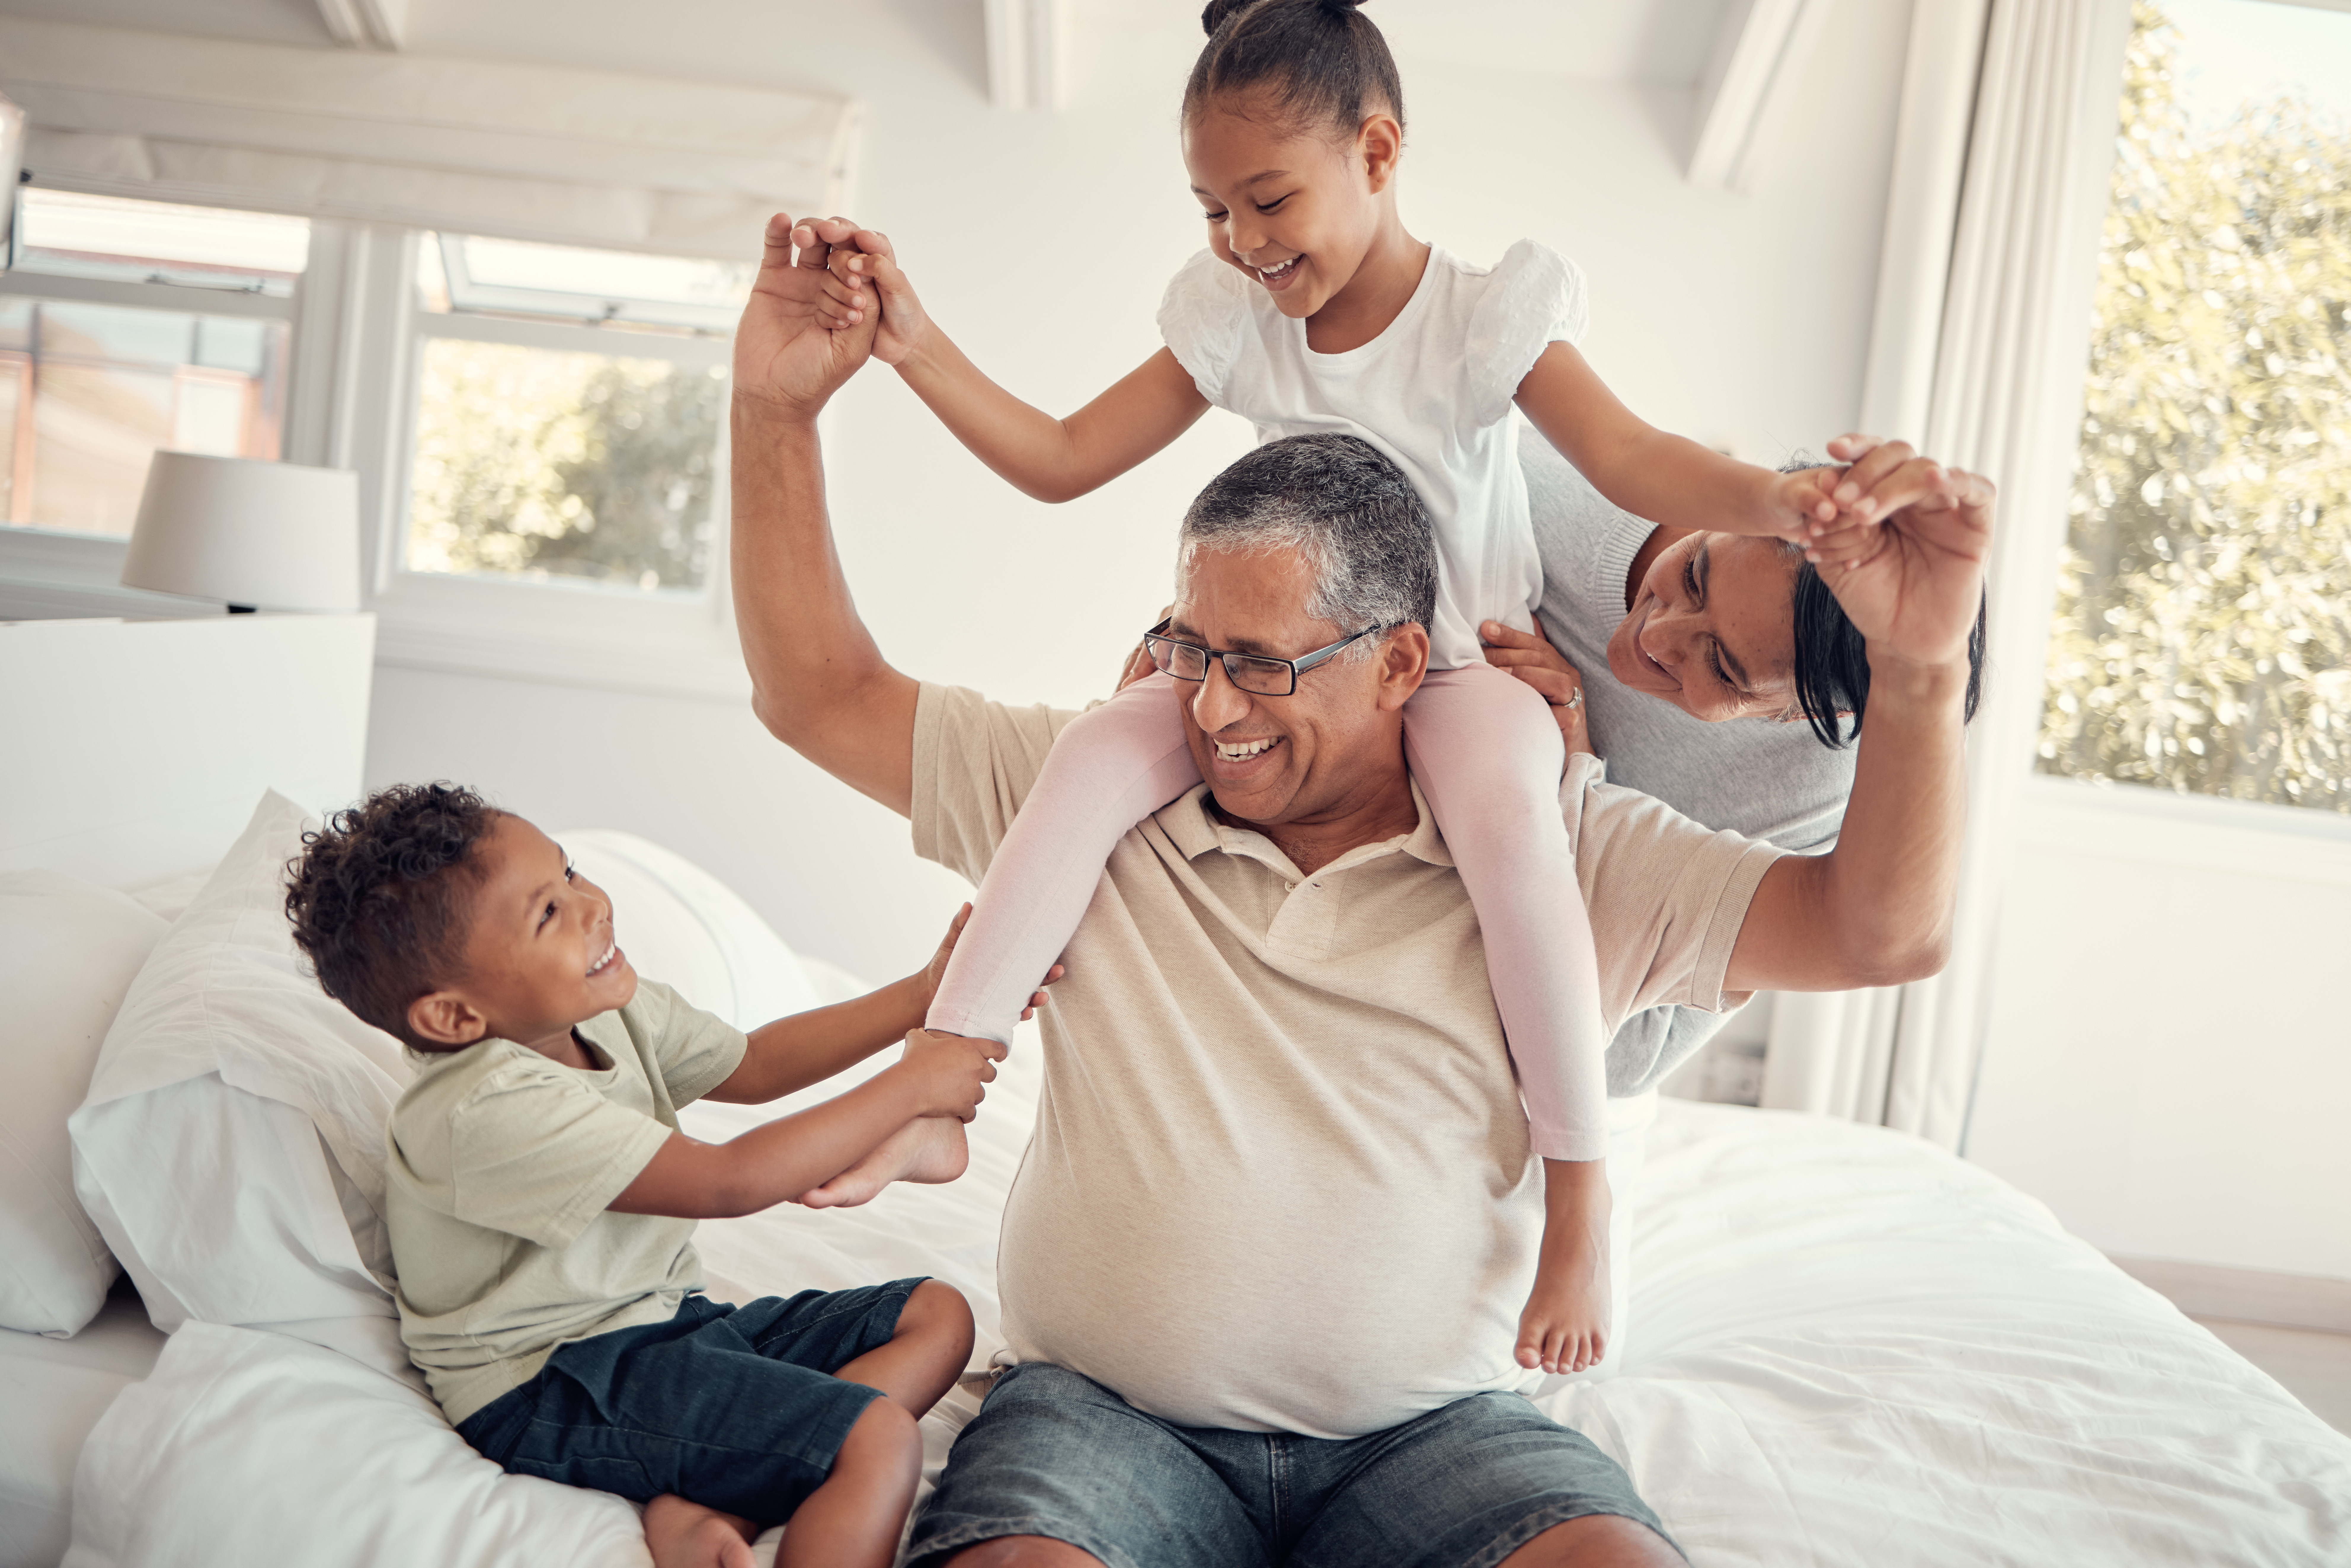 Family, grandfather and piggy back on bed, having fun and bonding. Support, love and care of grandpa, mom and kids playing, enjoying quality time together and relaxing in house on weekend in bedroom